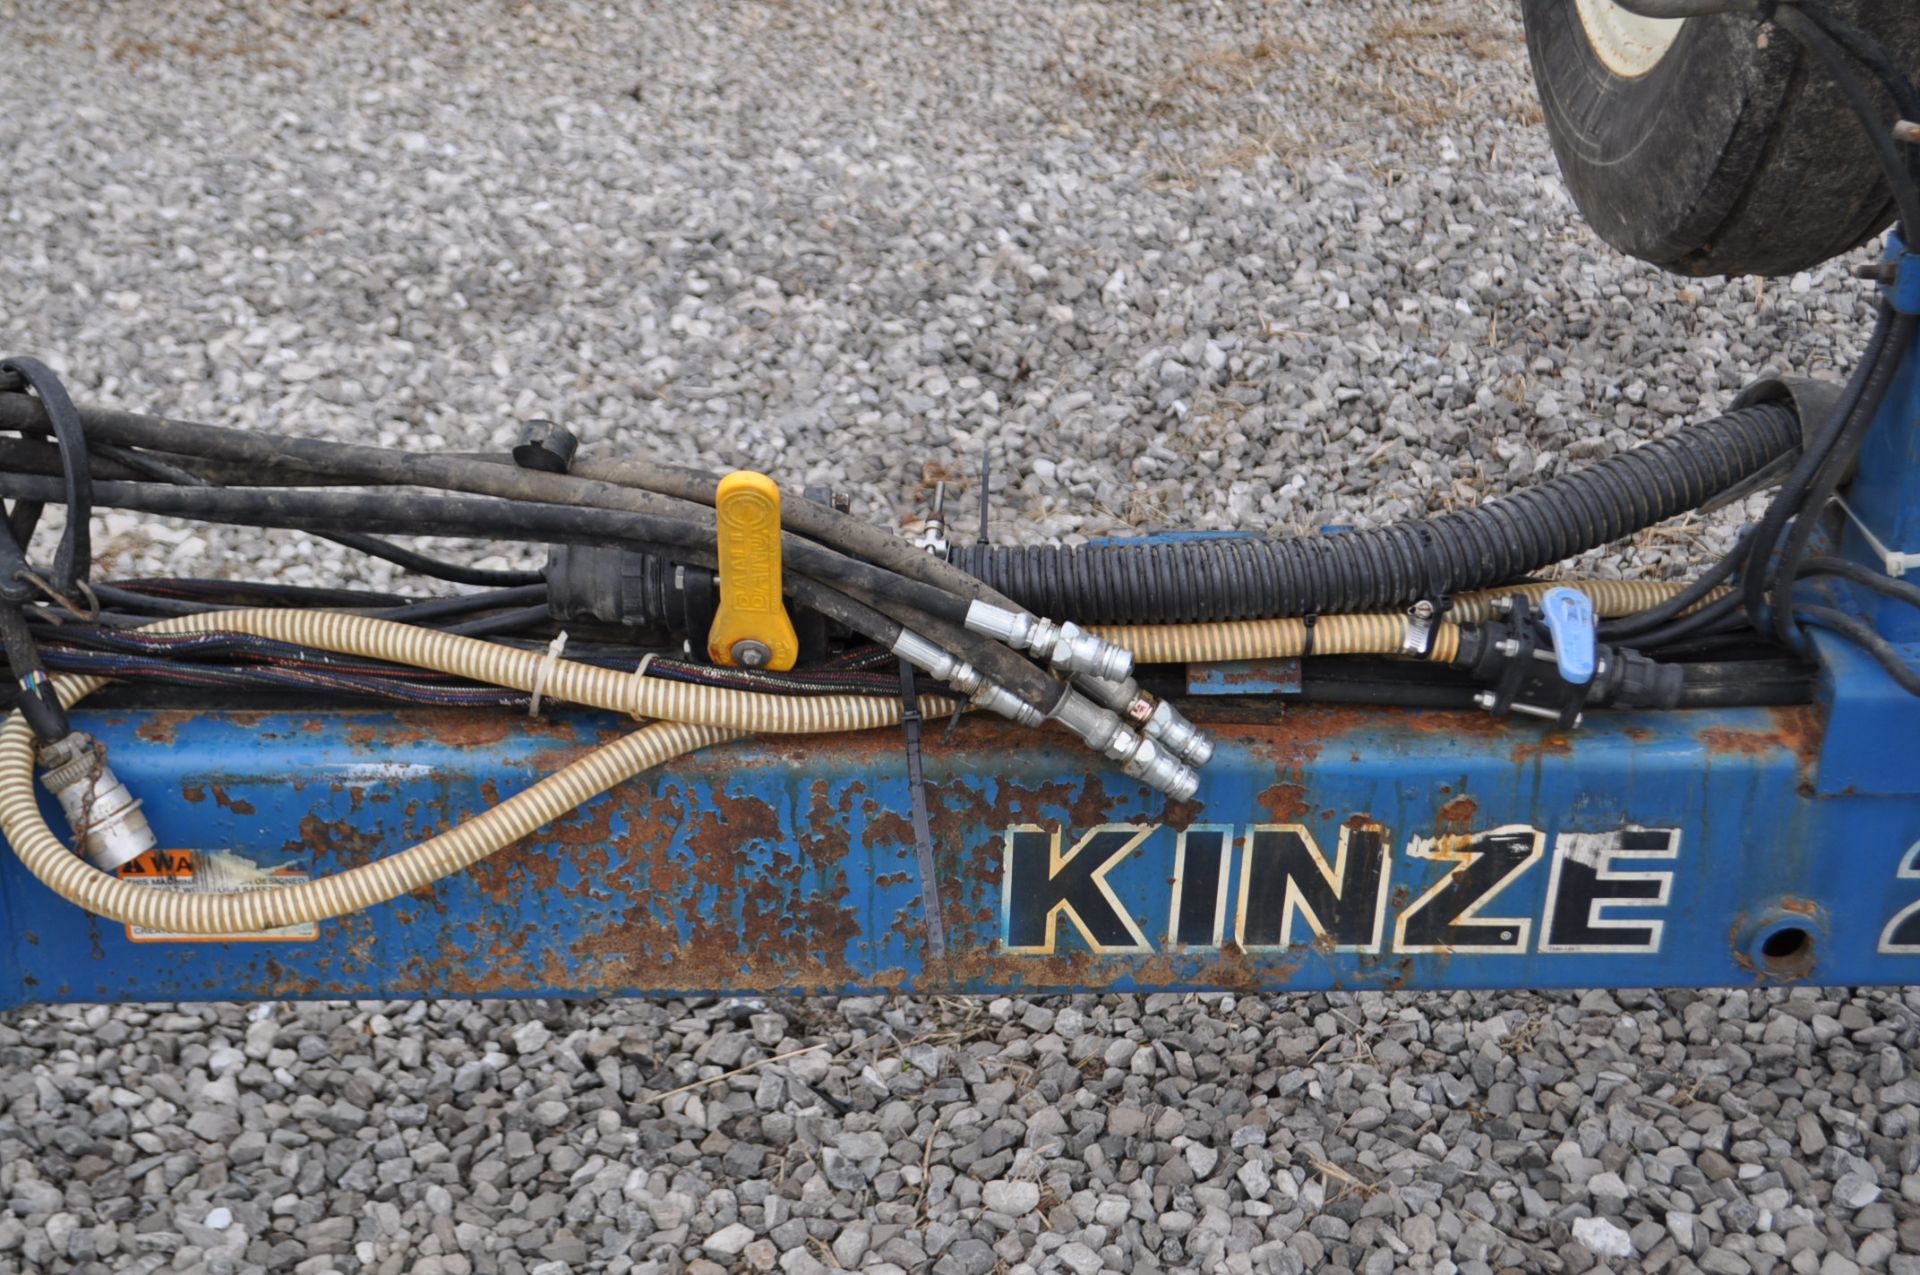 Kinze 2600 12 row corn planter, 2x2 and infurrow liquid, floating row cleaners, finger pickup, 1 - Image 6 of 26